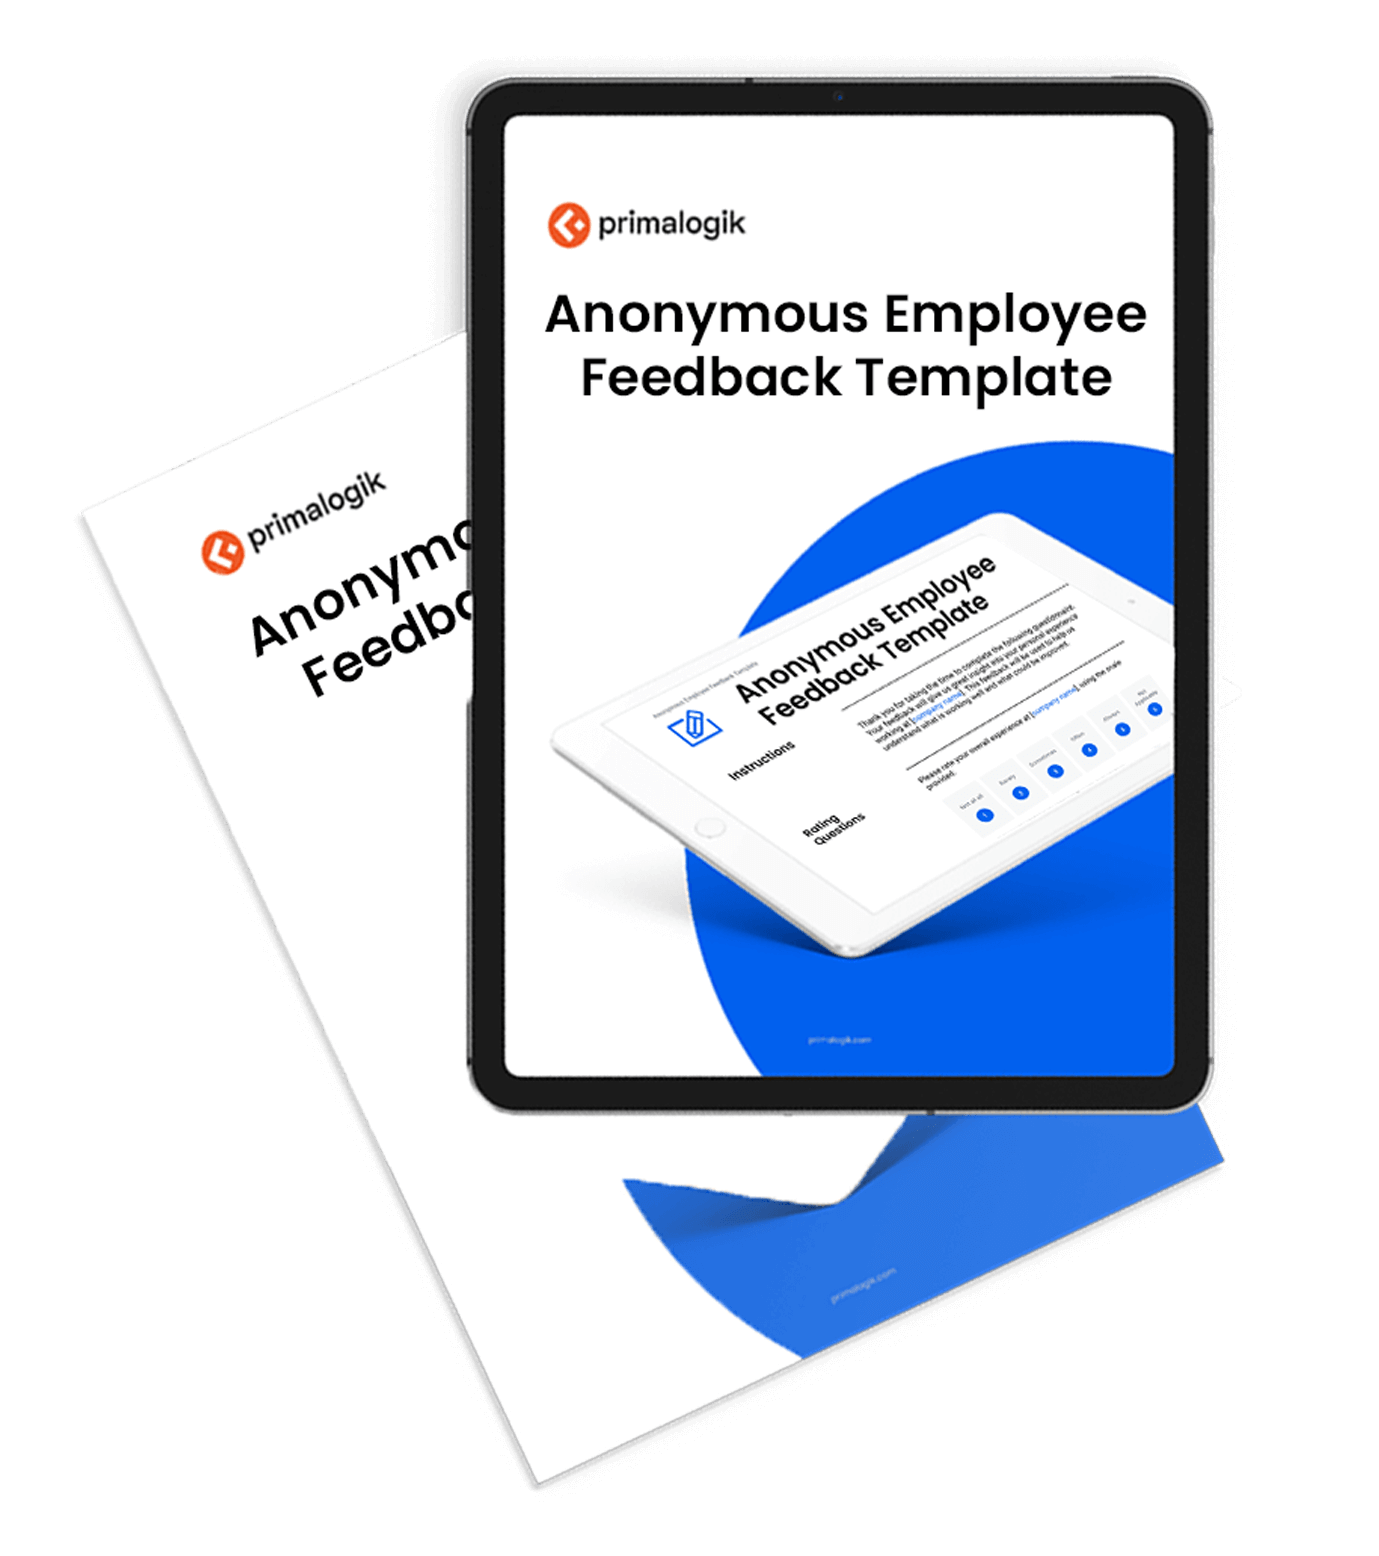 A document and a tablet showing The Anonymous Employee Feedback Template